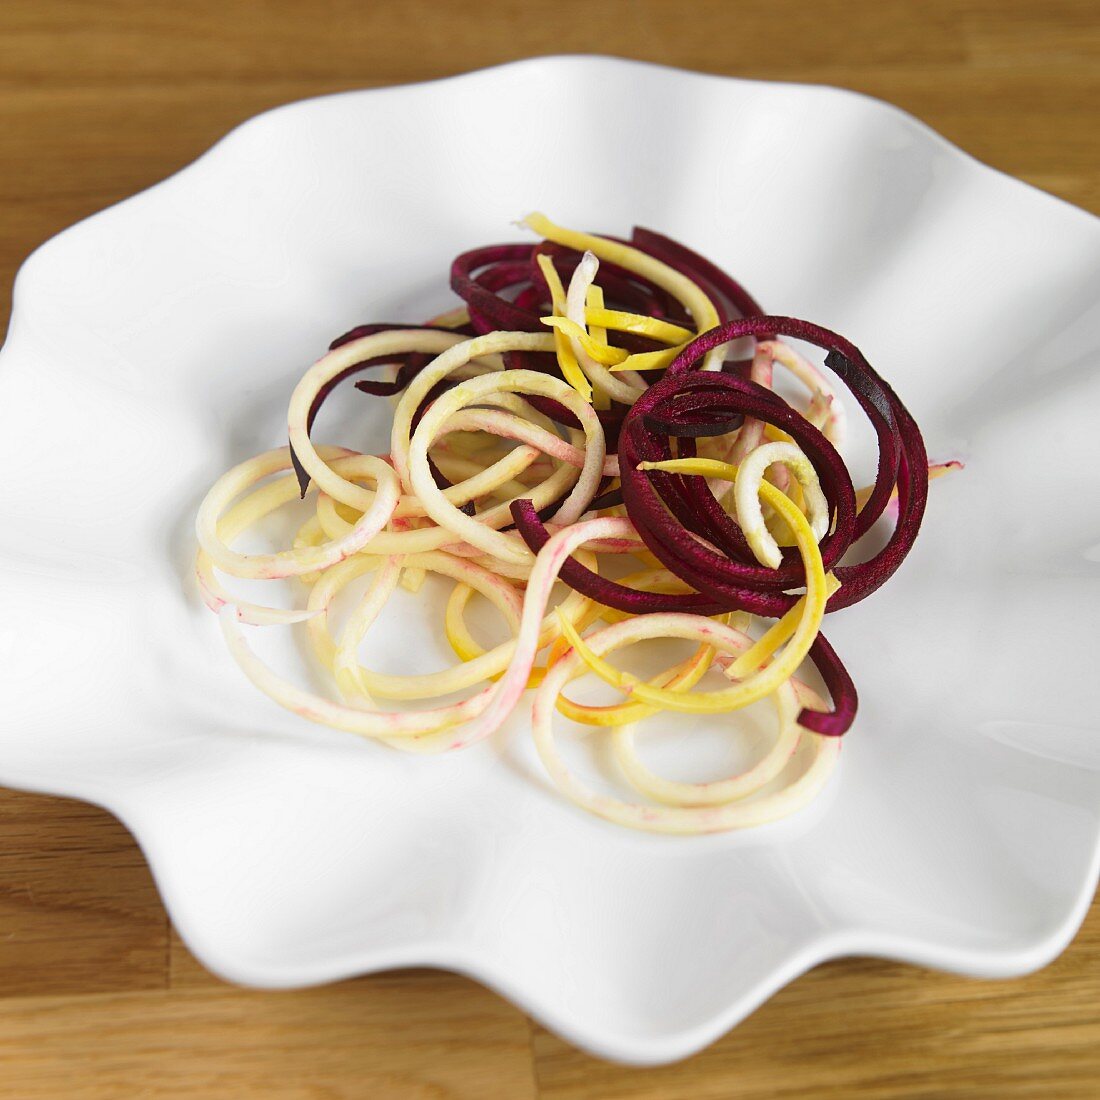 Vegetable spaghetti made from beetroot and yellow courgettes on a white plate